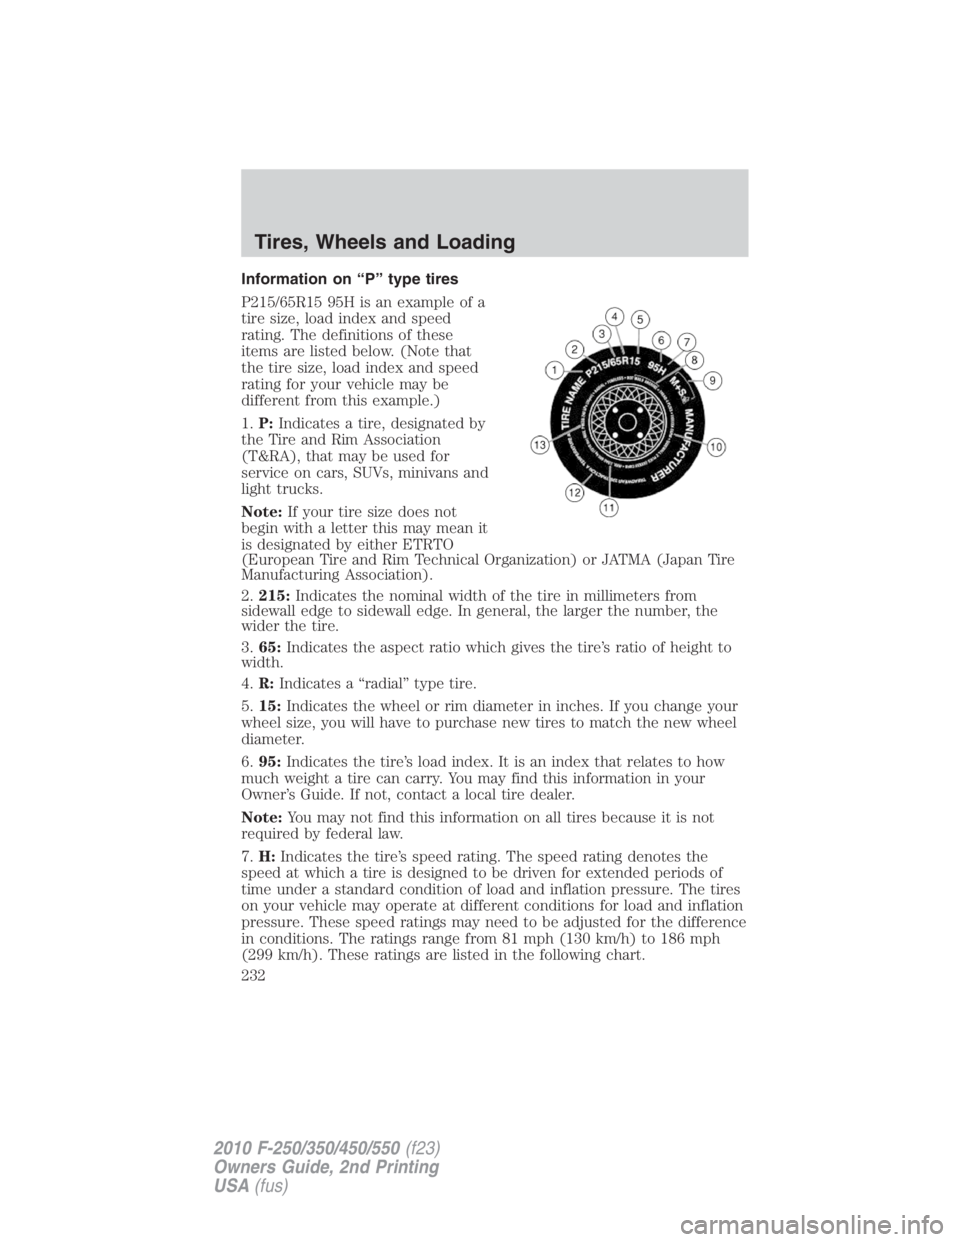 FORD F250 SUPER DUTY 2010  Owners Manual Information on “P” type tires
P215/65R15 95H is an example of a
tire size, load index and speed
rating. The definitions of these
items are listed below. (Note that
the tire size, load index and sp